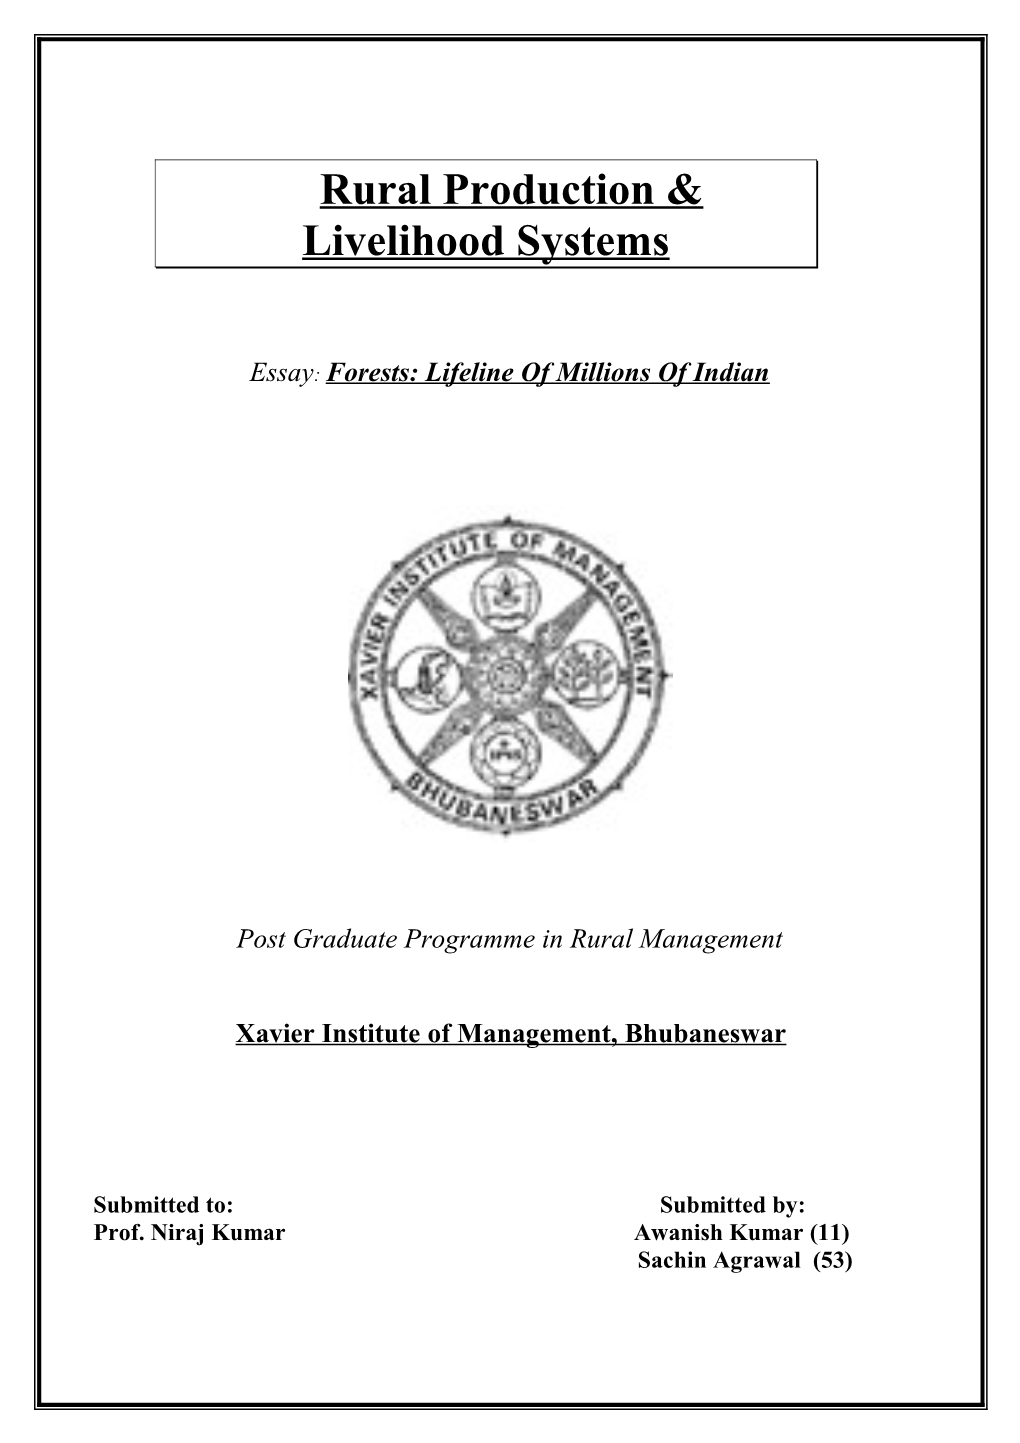 Rural Production & Livelihood Systems